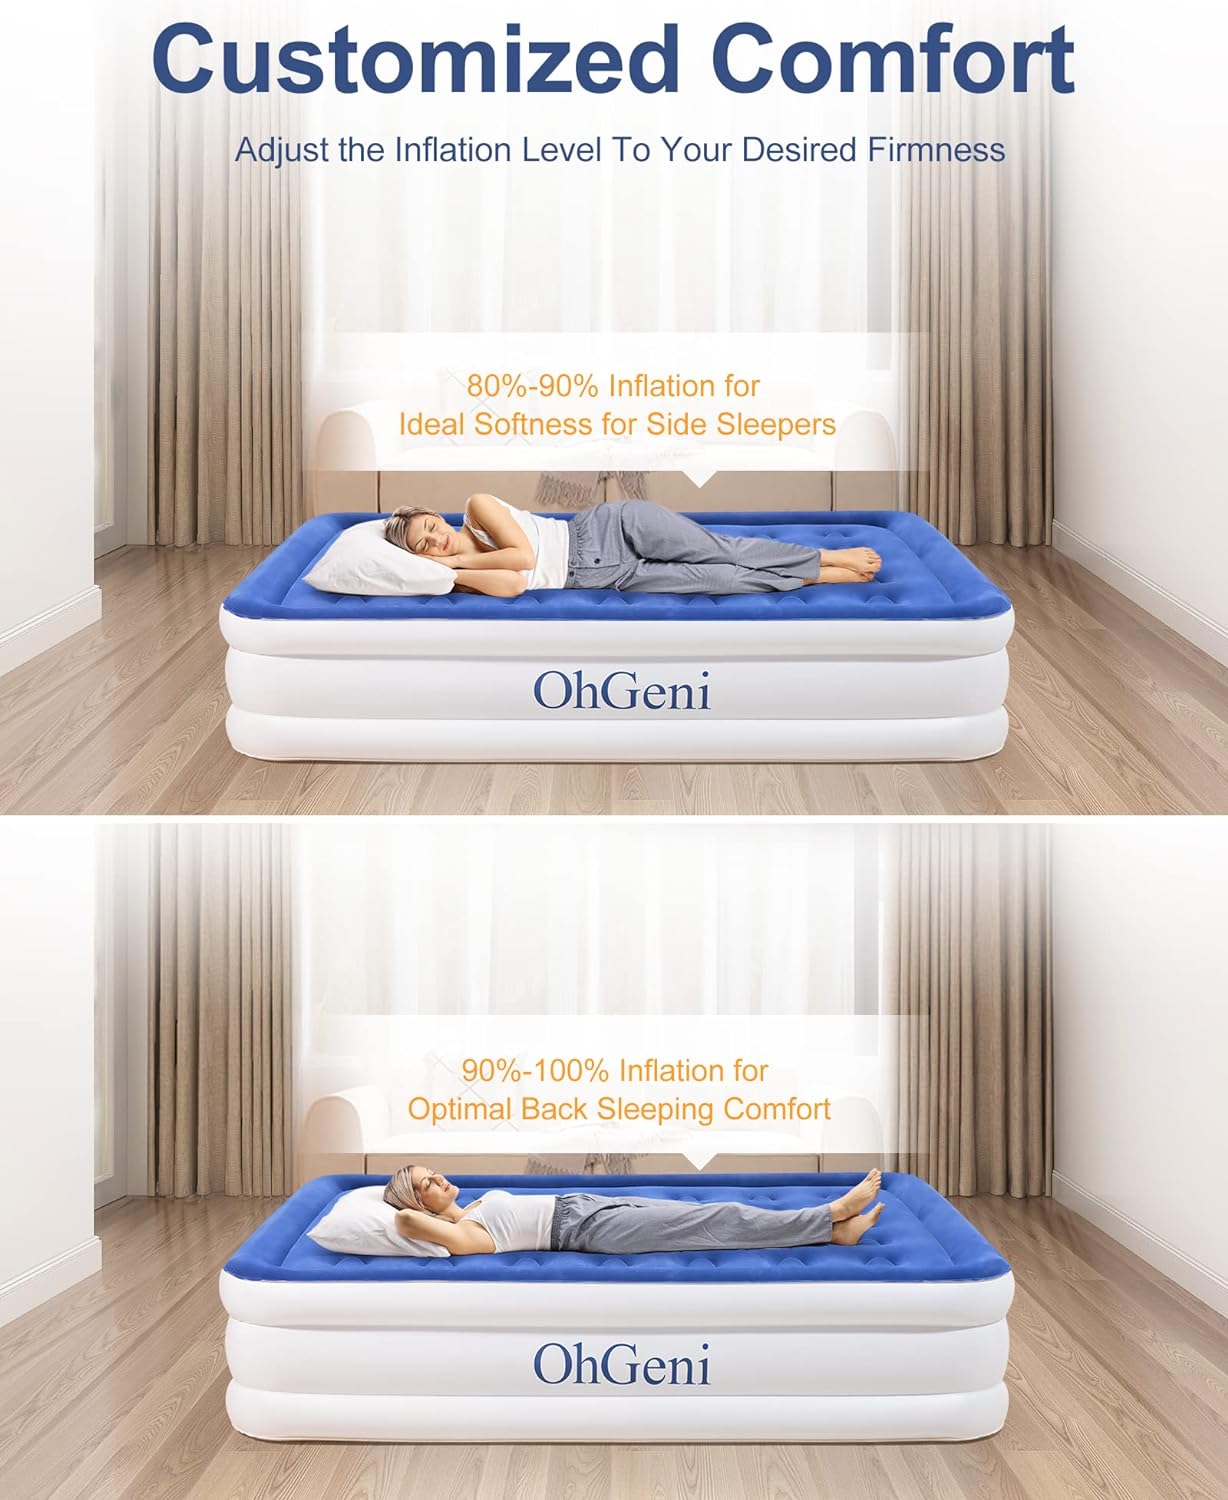 Queen Size Air Mattress |18"|Blue&White|OhGeni - aborderproducts